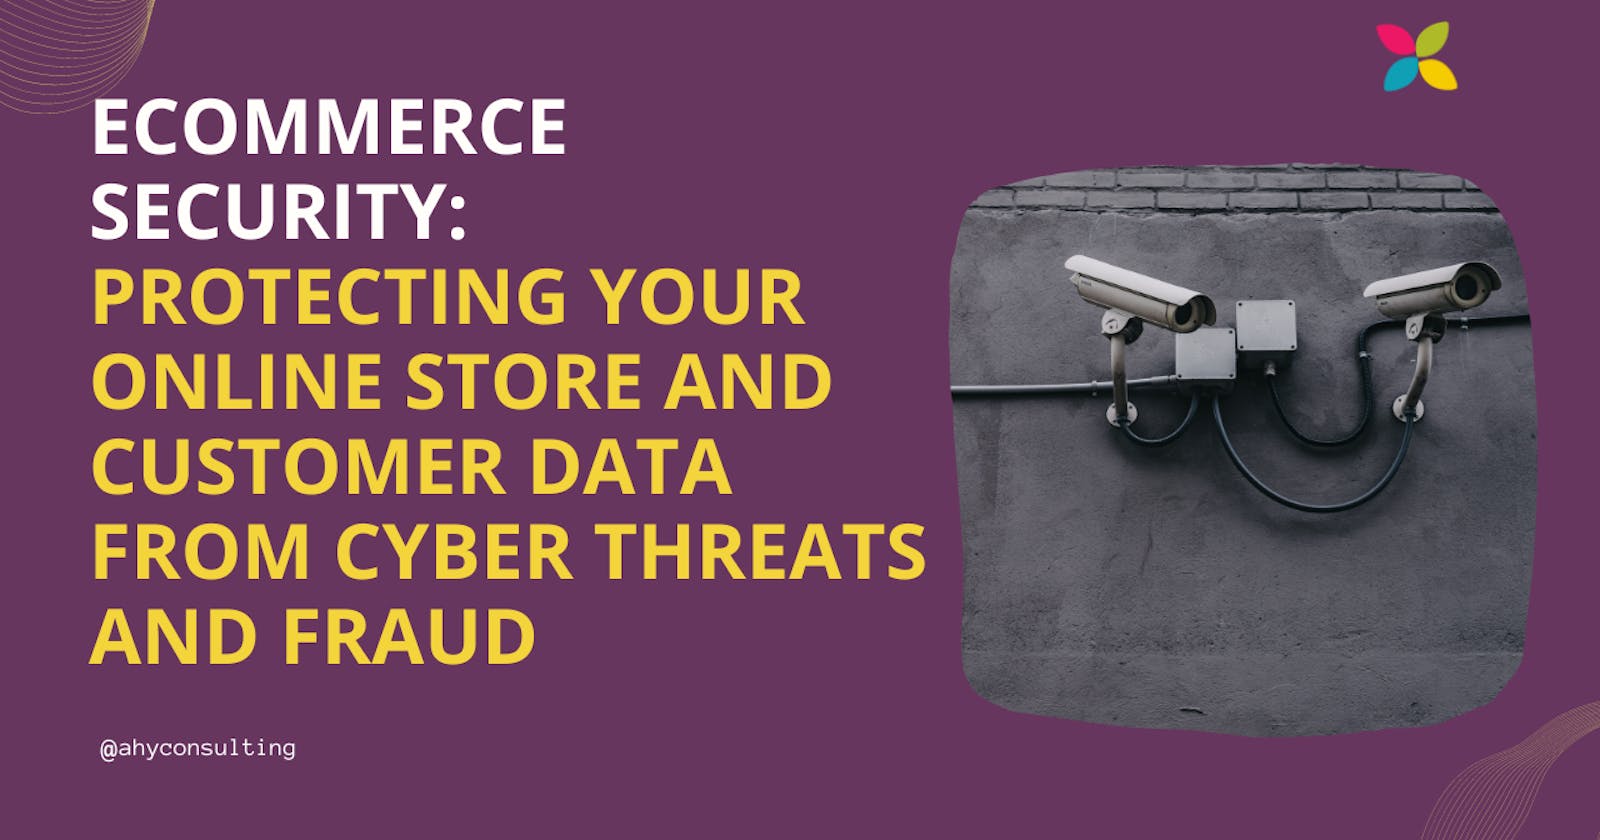 eCommerce Security: Protecting Your Online Store and Customer Data from Cyber Threats and Fraud